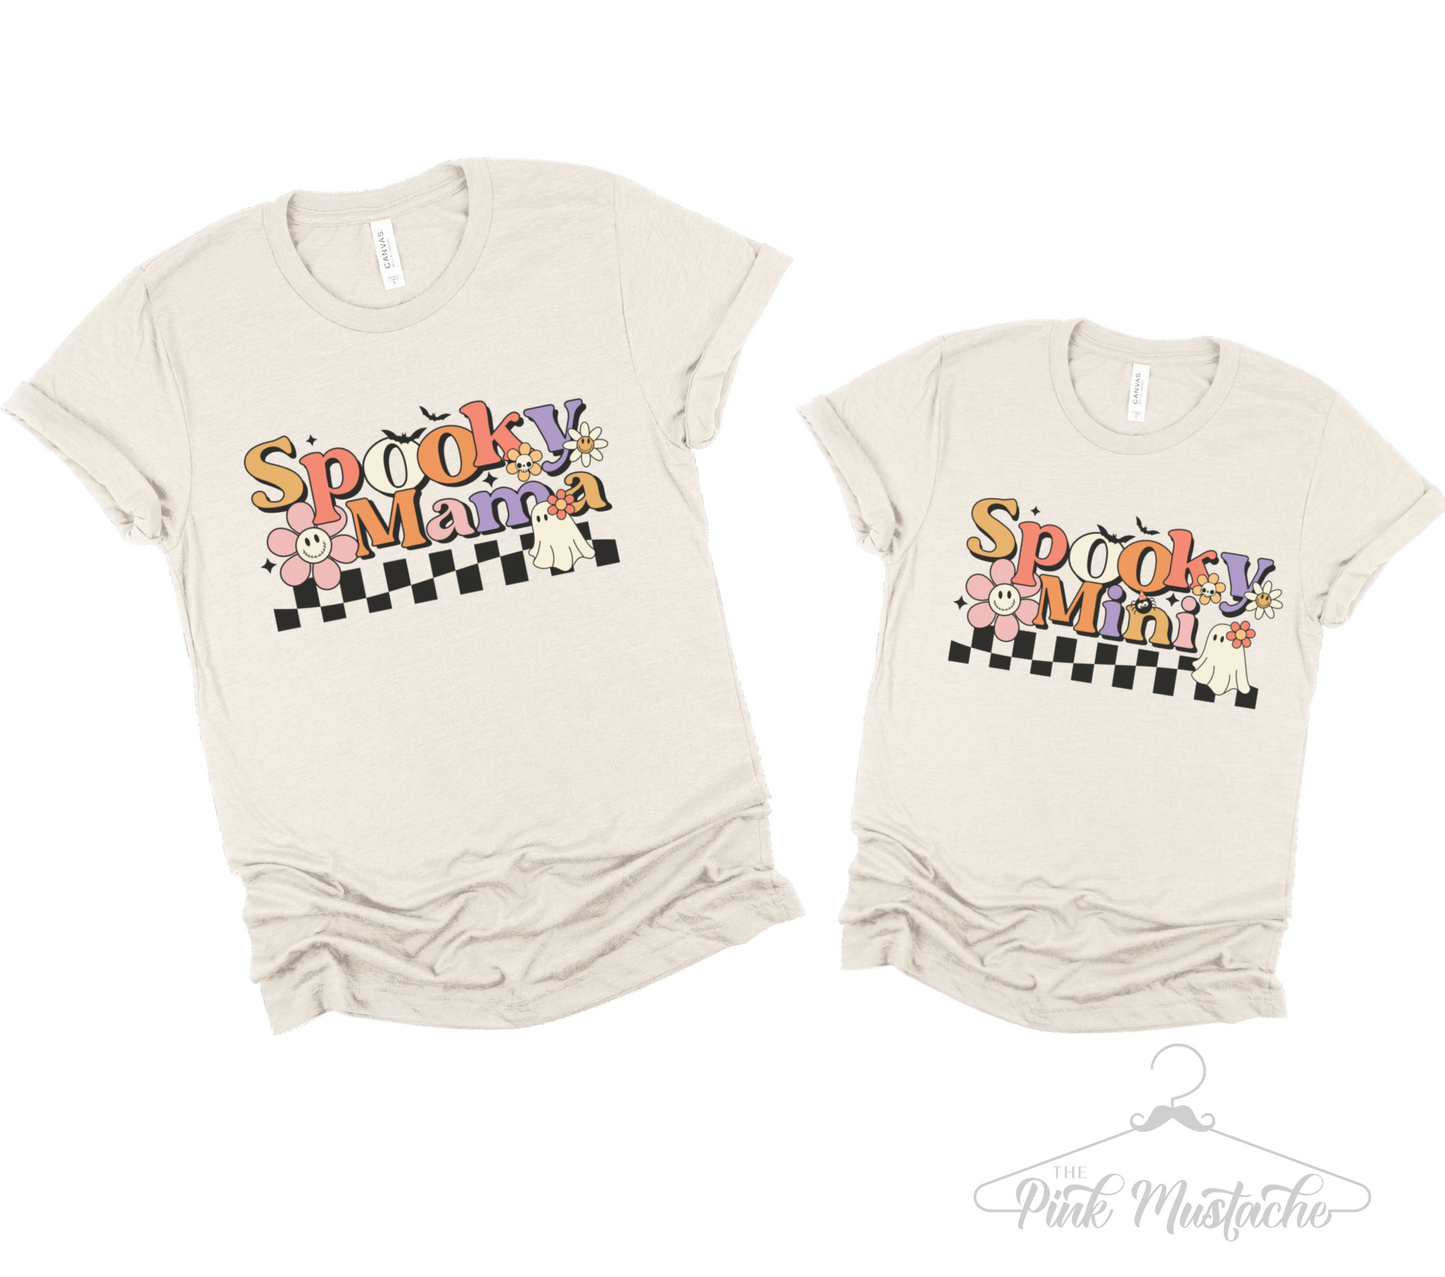 Halloween Spooky Mama, Spooky Mini - Matching Mommy and Me Halloween Shirts